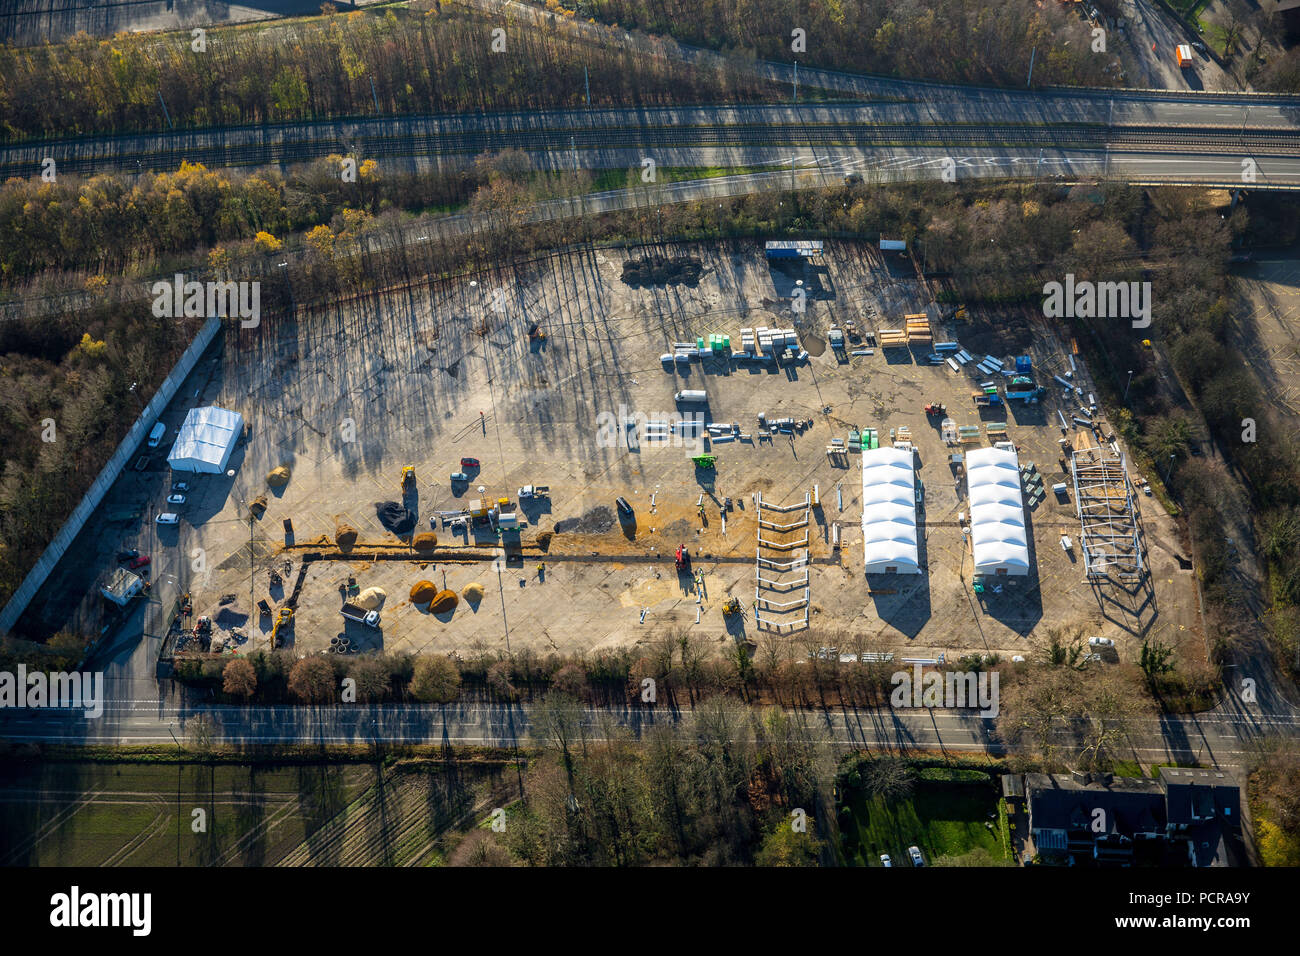 Construction of a lightweight refugee shelter on the former parking lot at OPEL-Werk 1, Wittener Straße, Bochum, Ruhr area, North Rhine-Westphalia, Germany Stock Photo